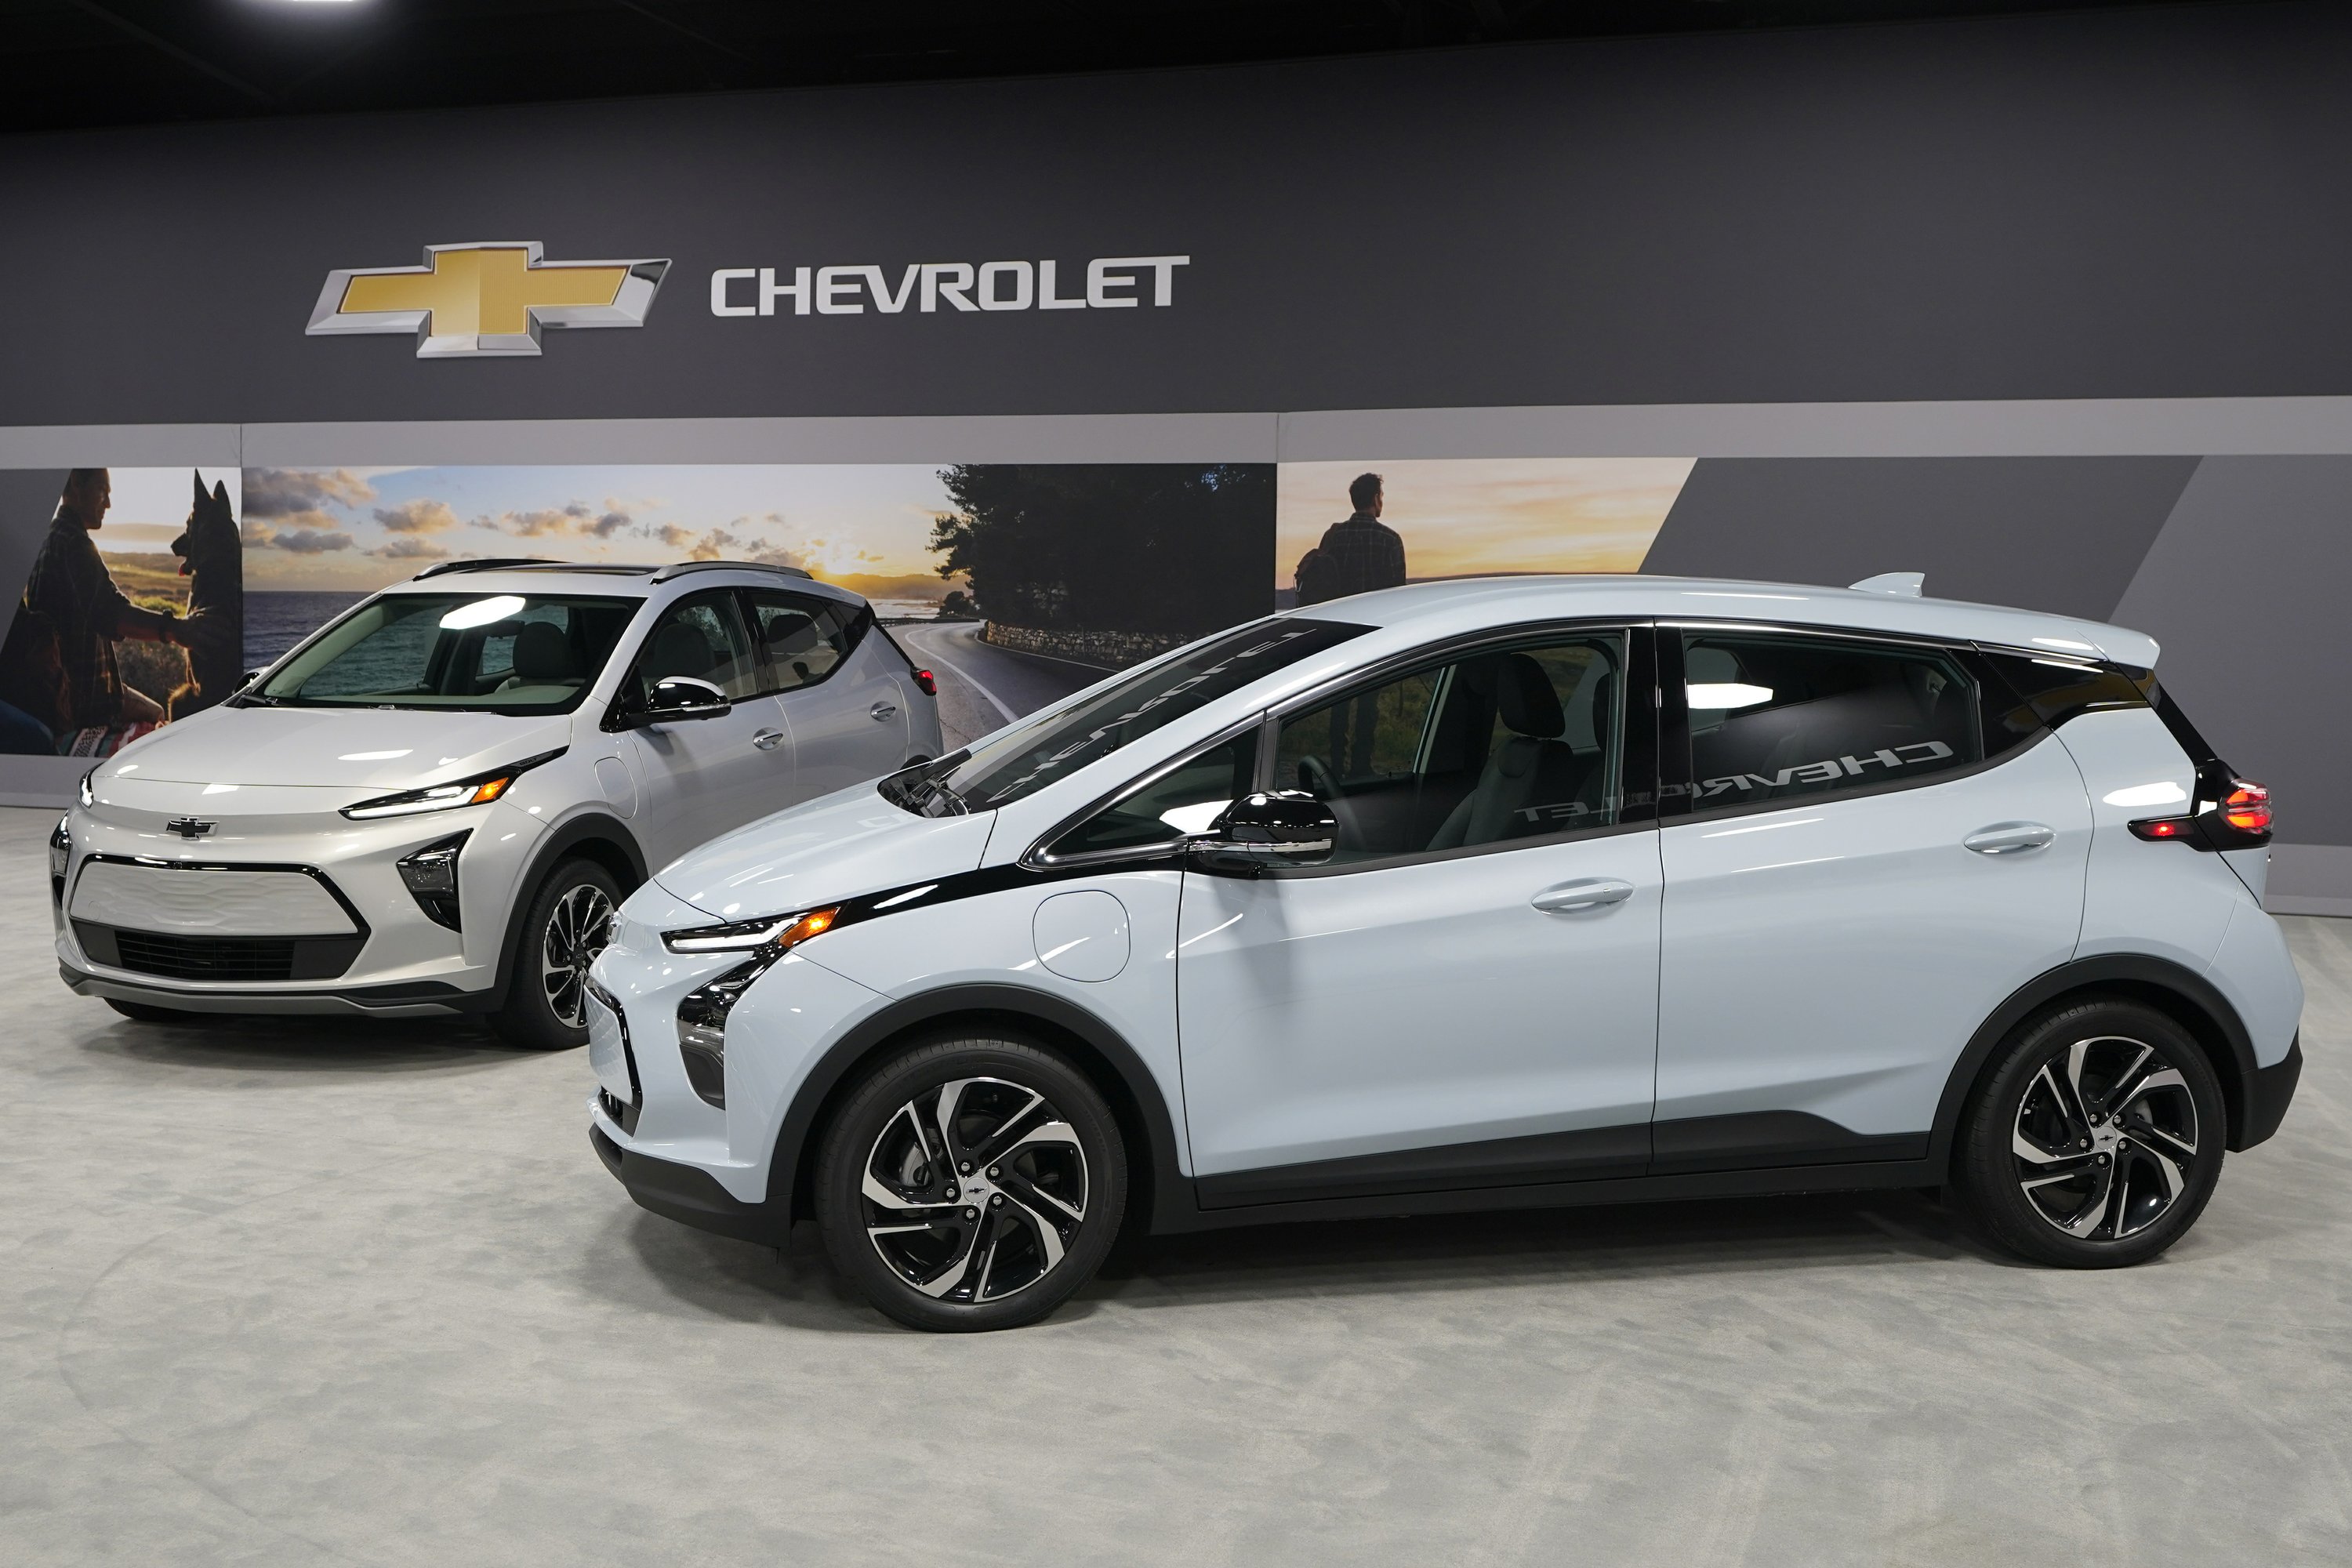 GM’s Chevy Bolt SUV joins the parade of new American electric vehicles